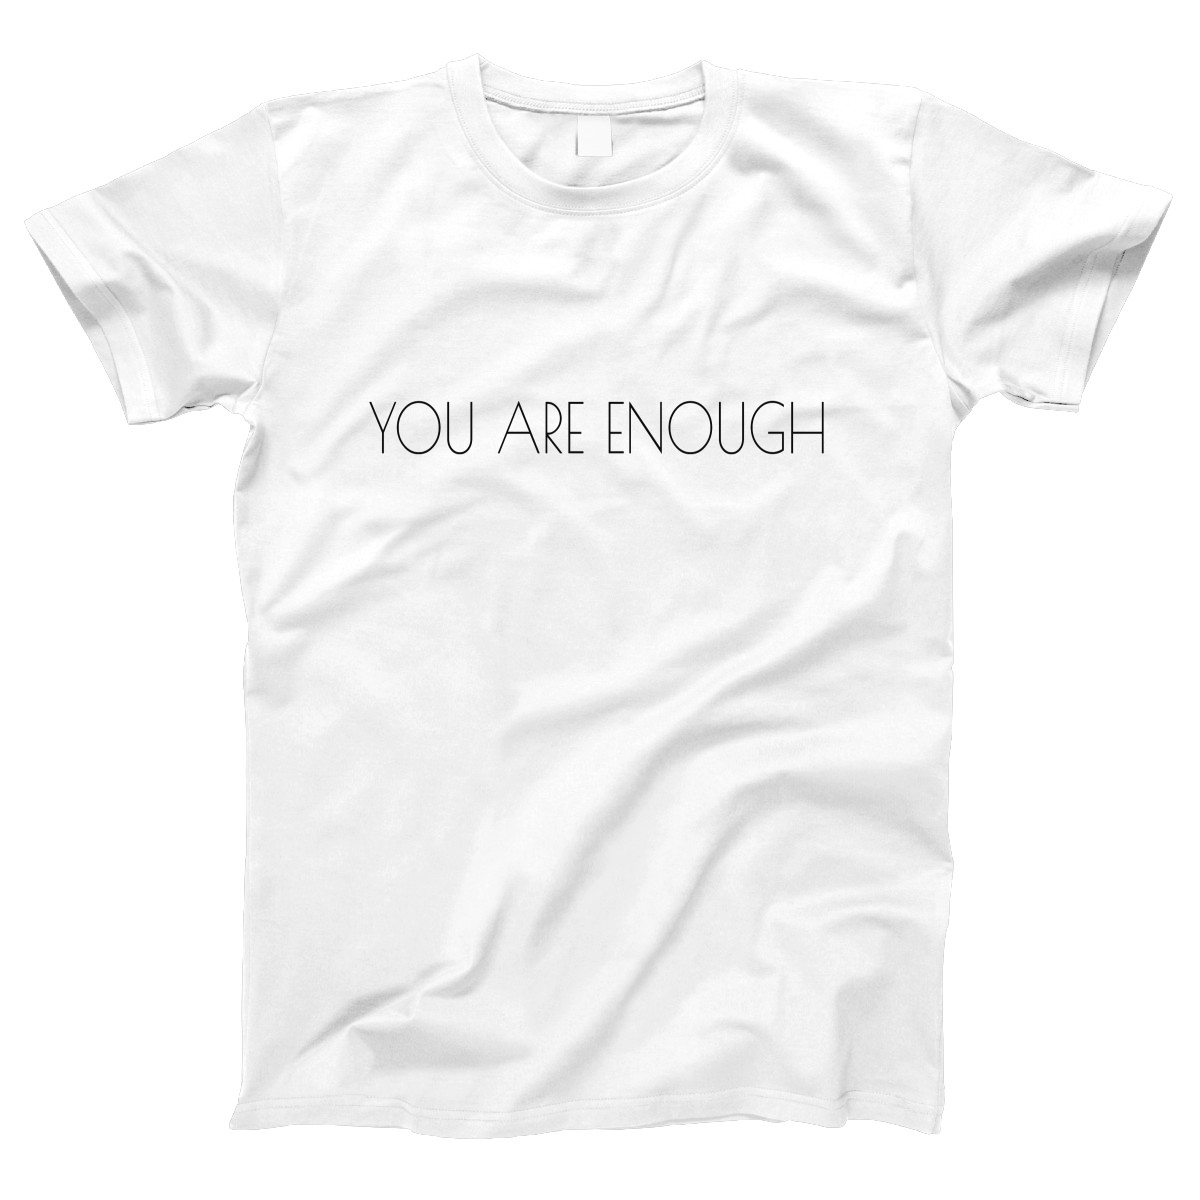 You are enough Women's T-shirt | White